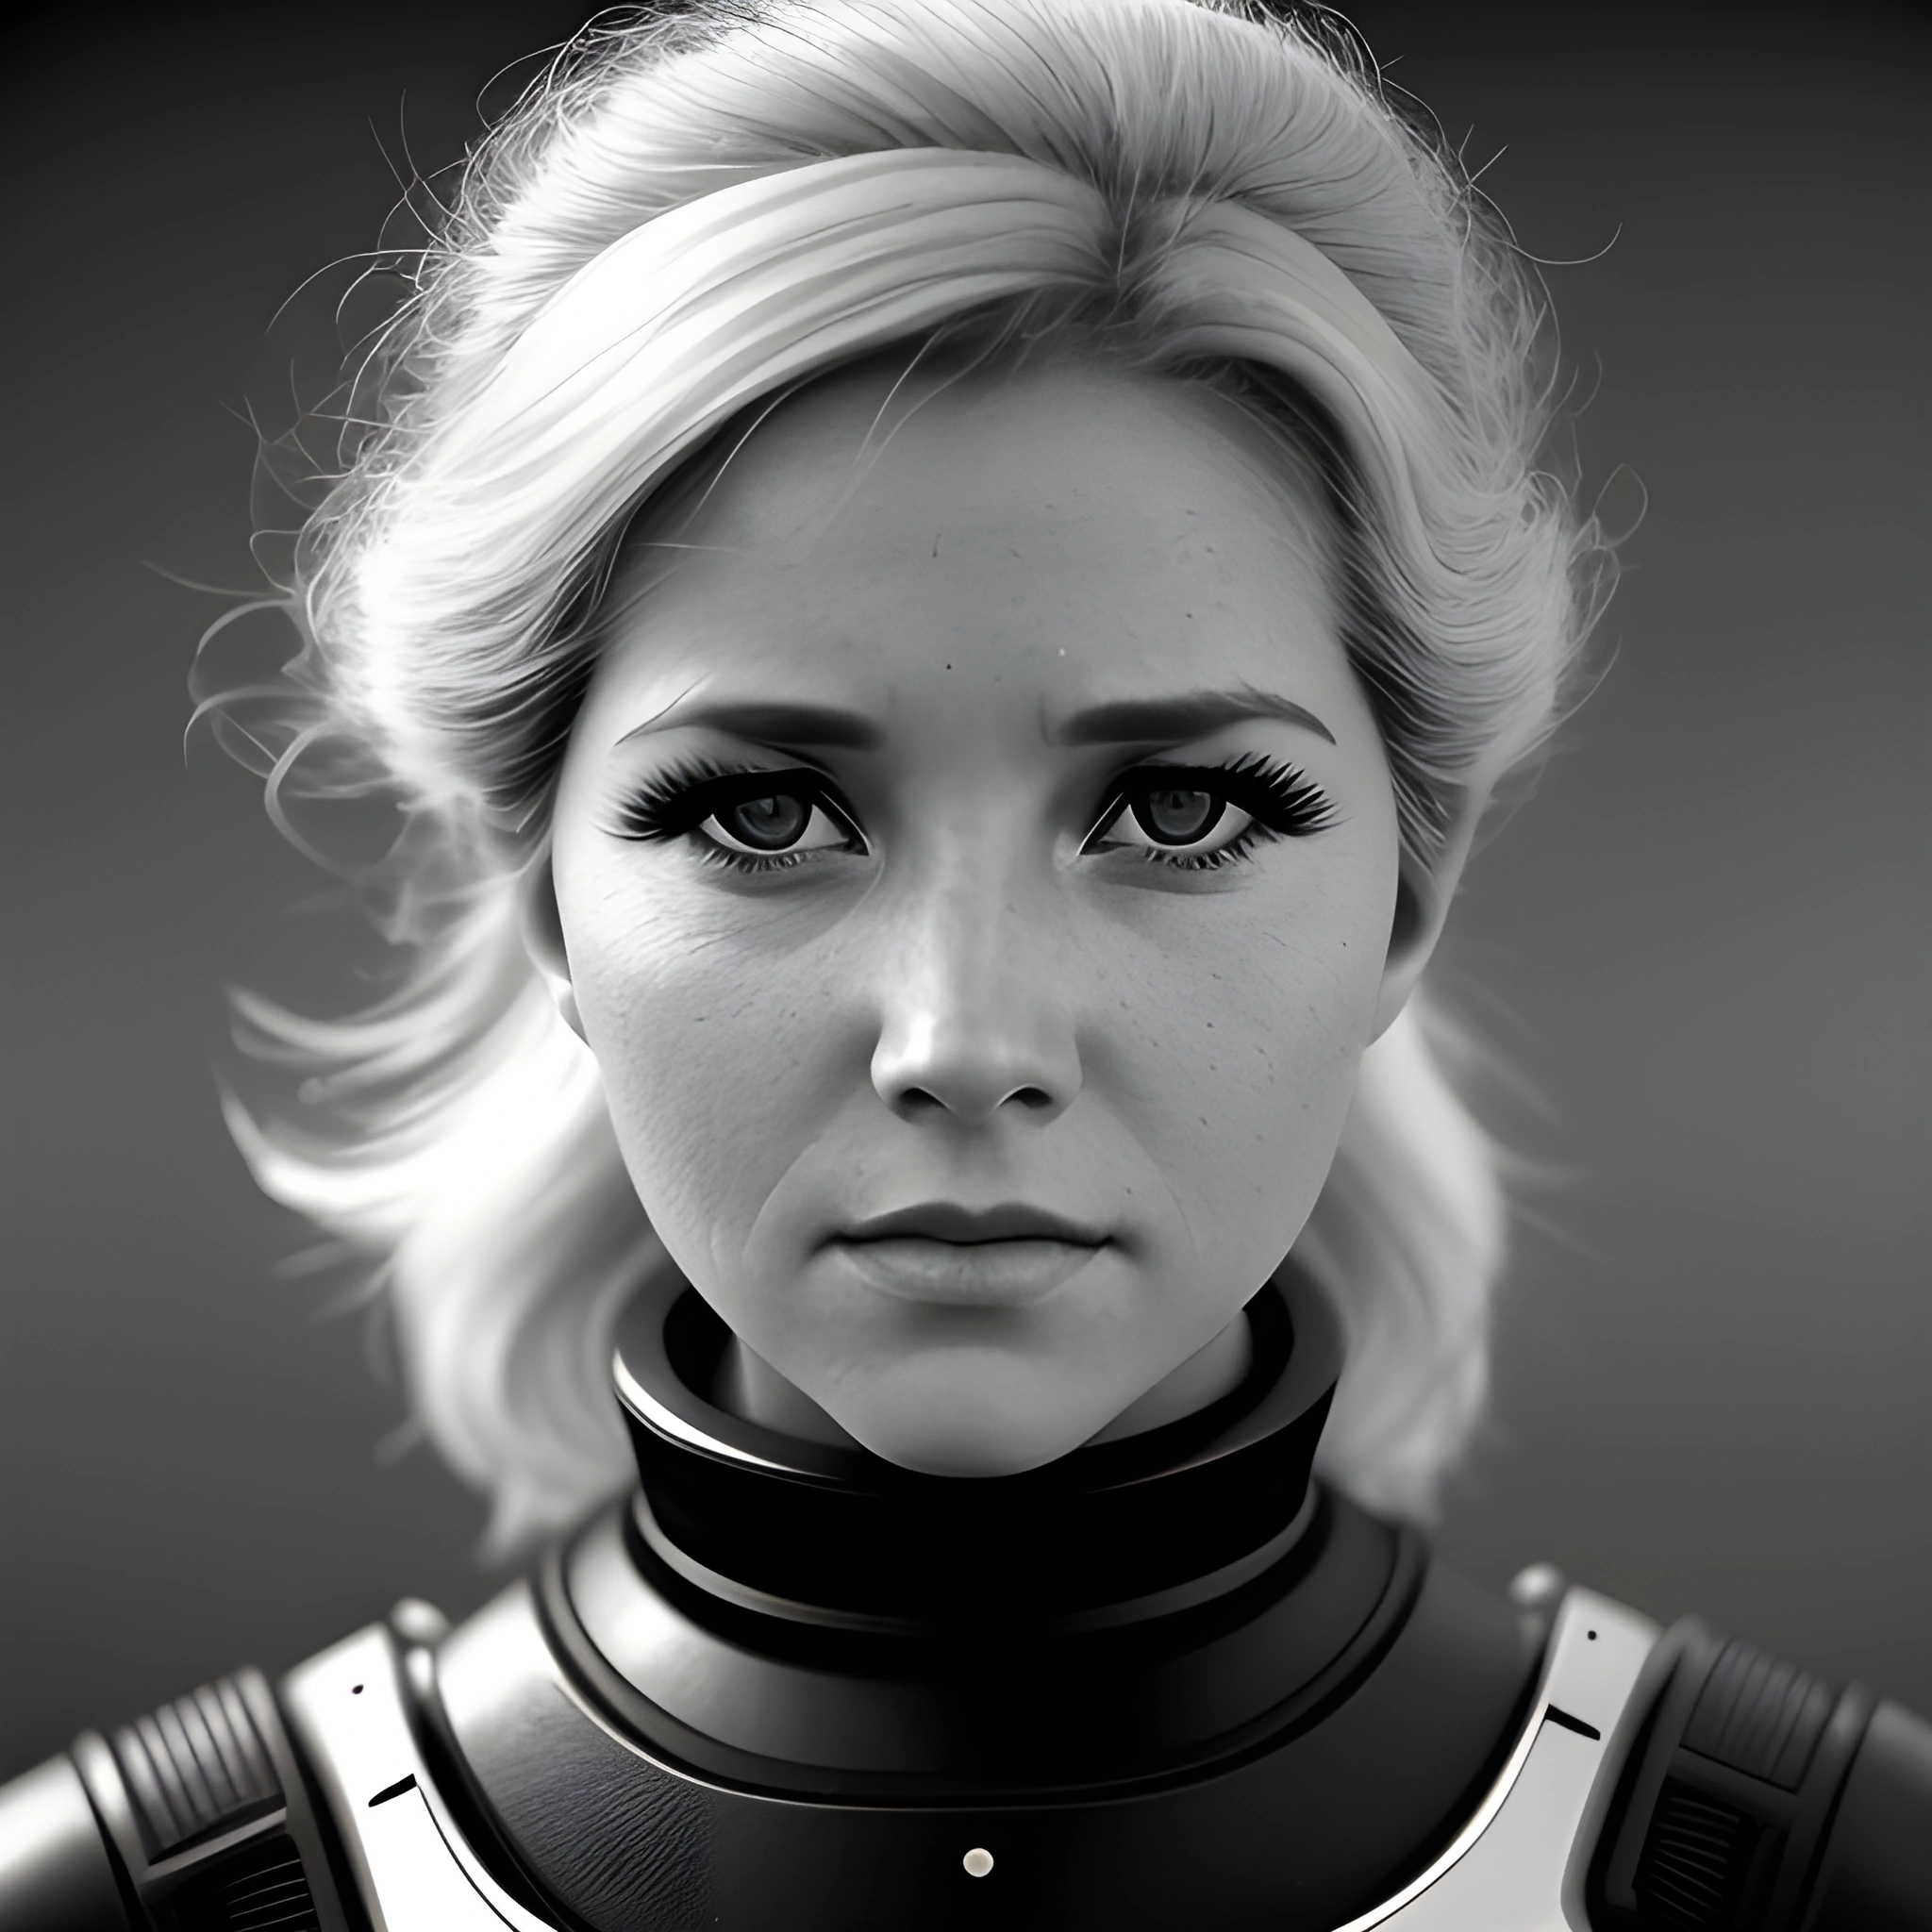 blond woman in black and white photo with collar and collar